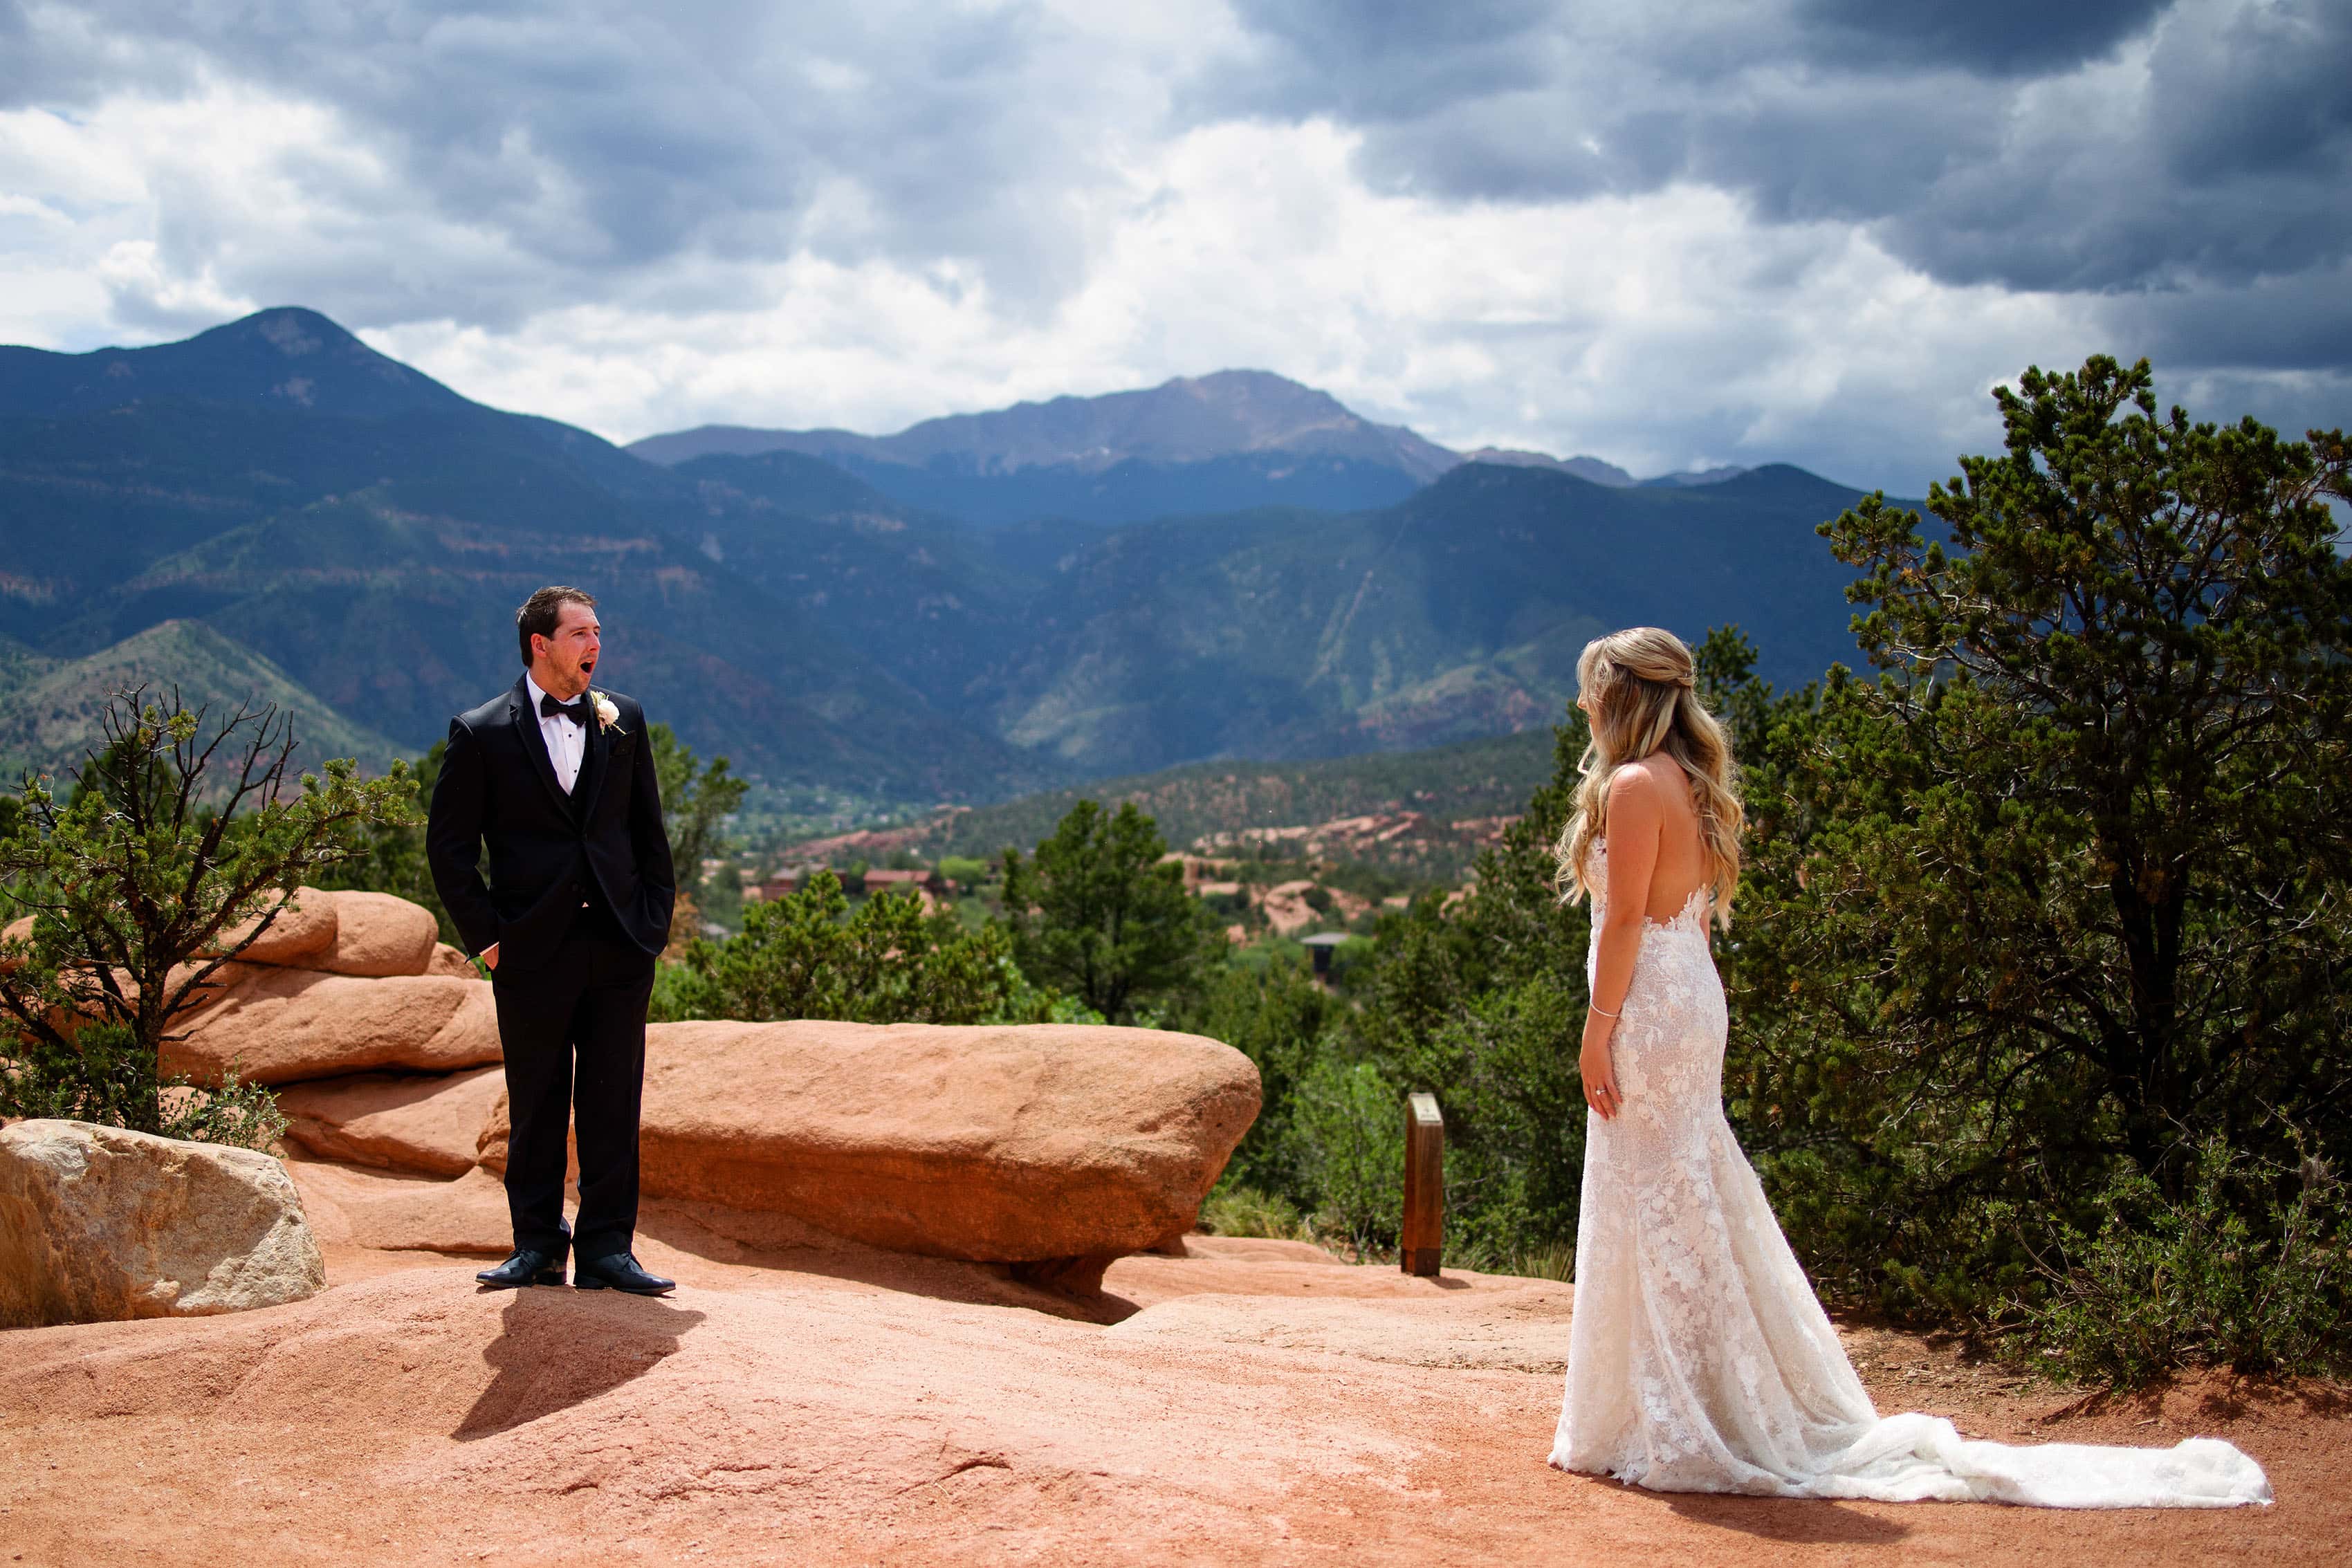 The groom reacts to seeing the bride during their first look at Garden of the Gods